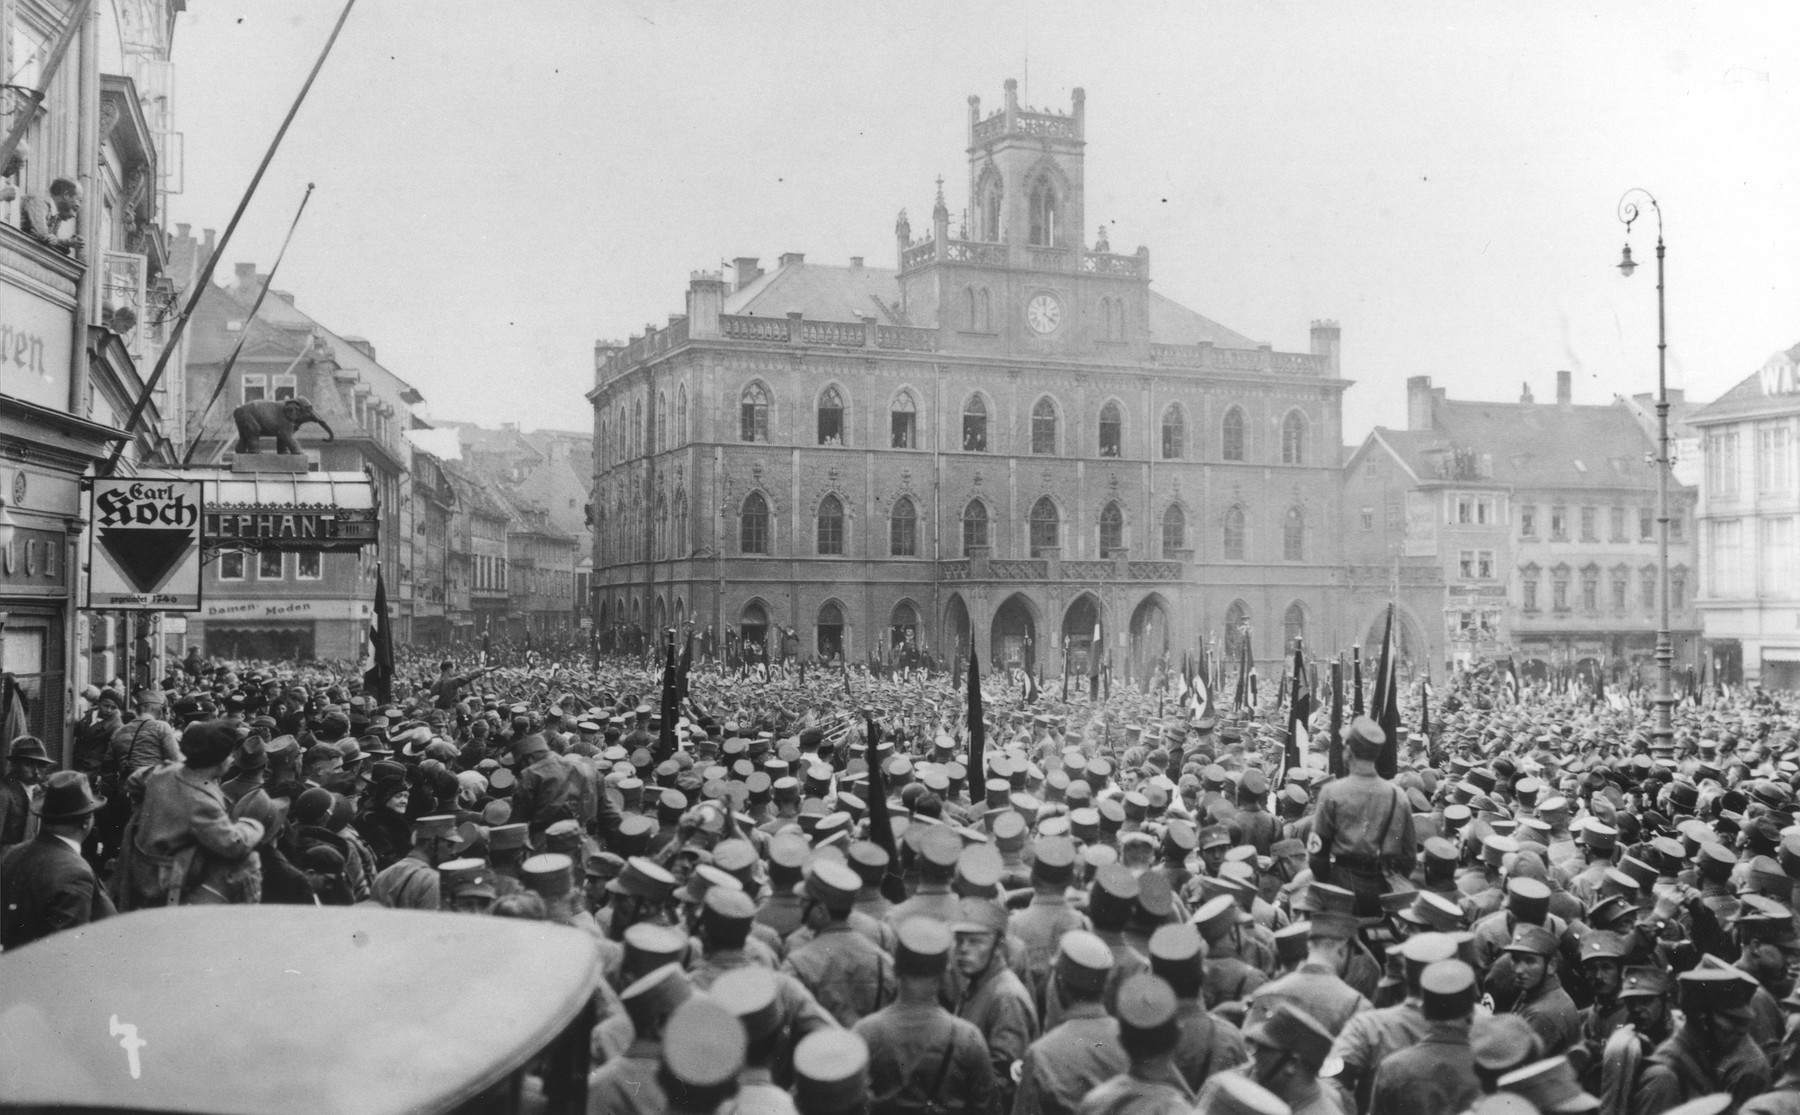 A crowd fills the main public square during a Gau Parteitag [District Party Day] demonstration in Weimar.